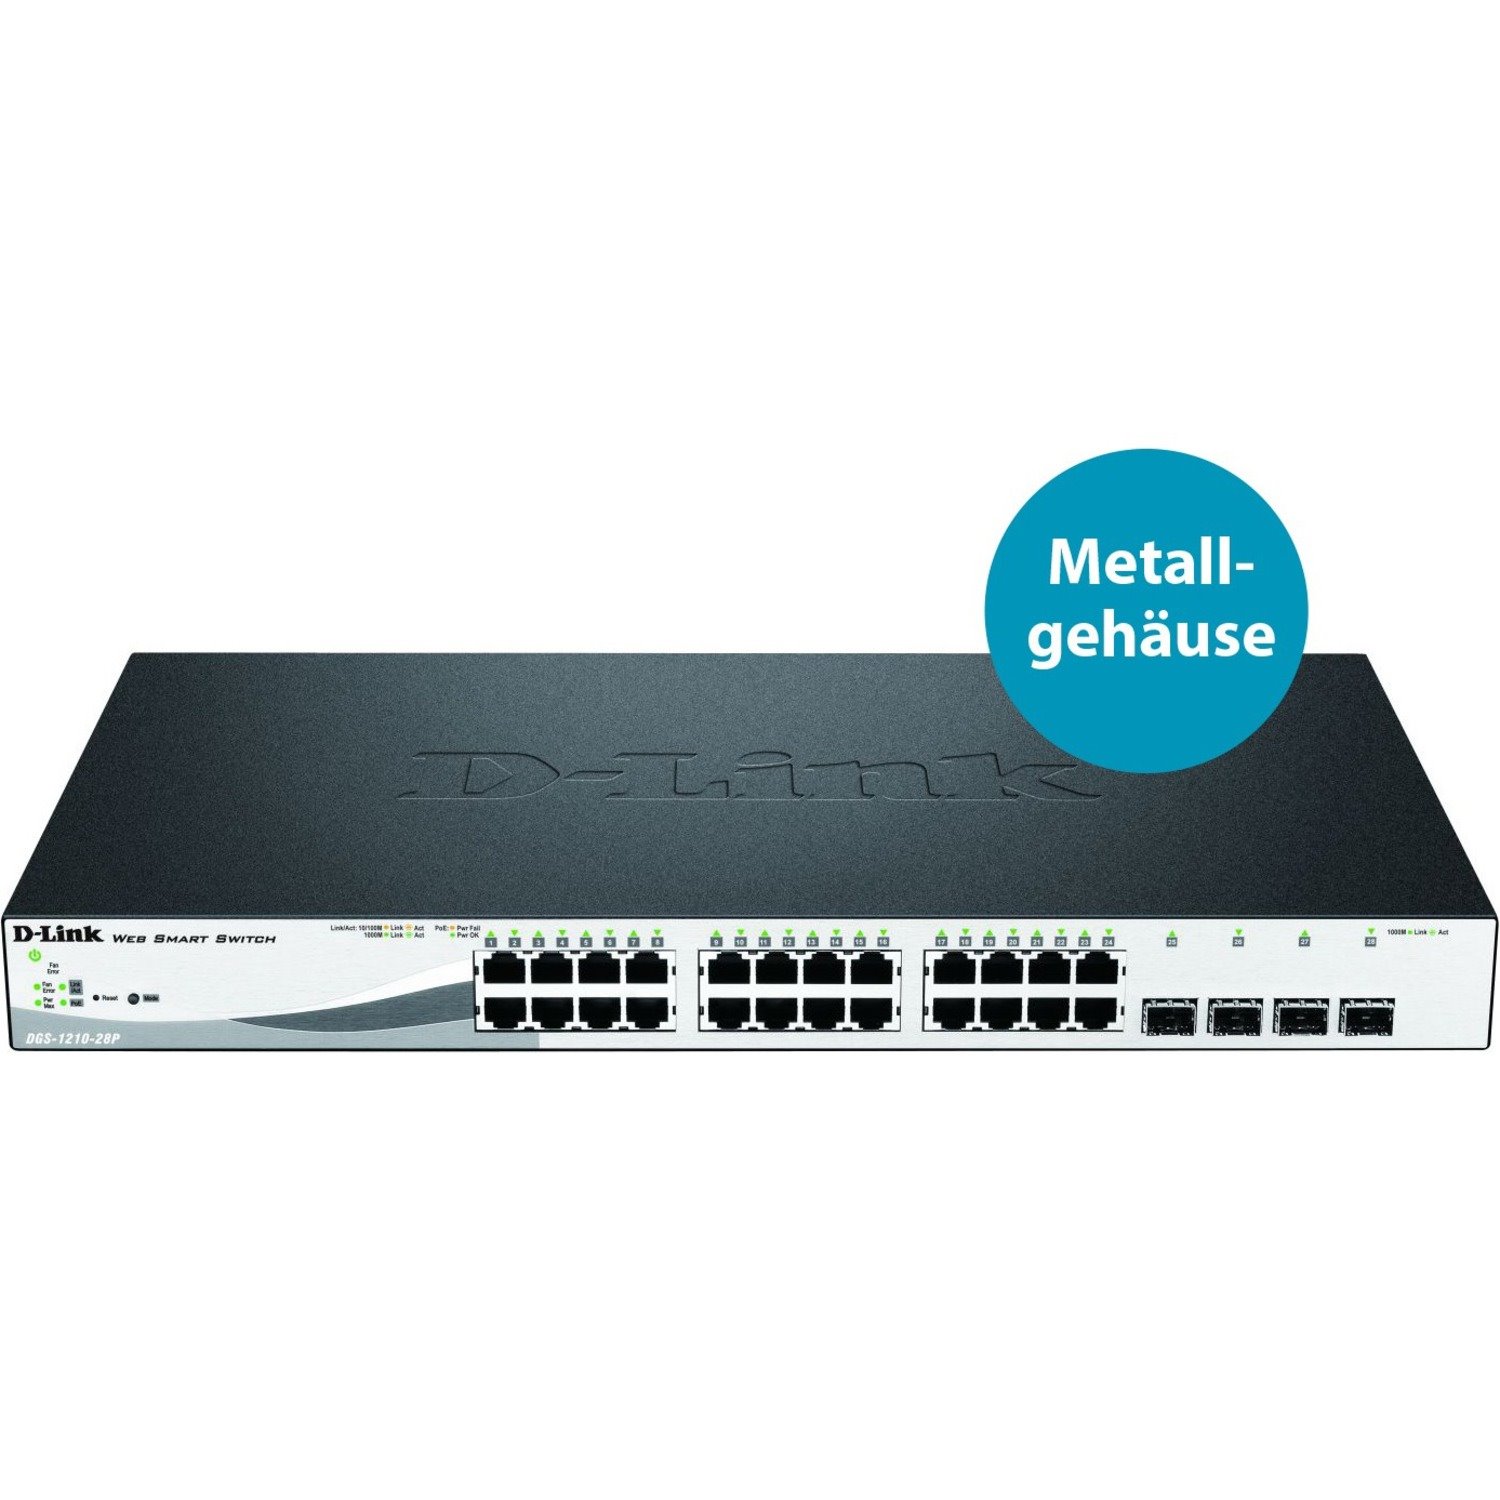 D-Link DGS-1210-28P - 28-Port Gigabit Smart Managed PoE Switch with 28 RJ45 and 4 SFP (Combo) Ports